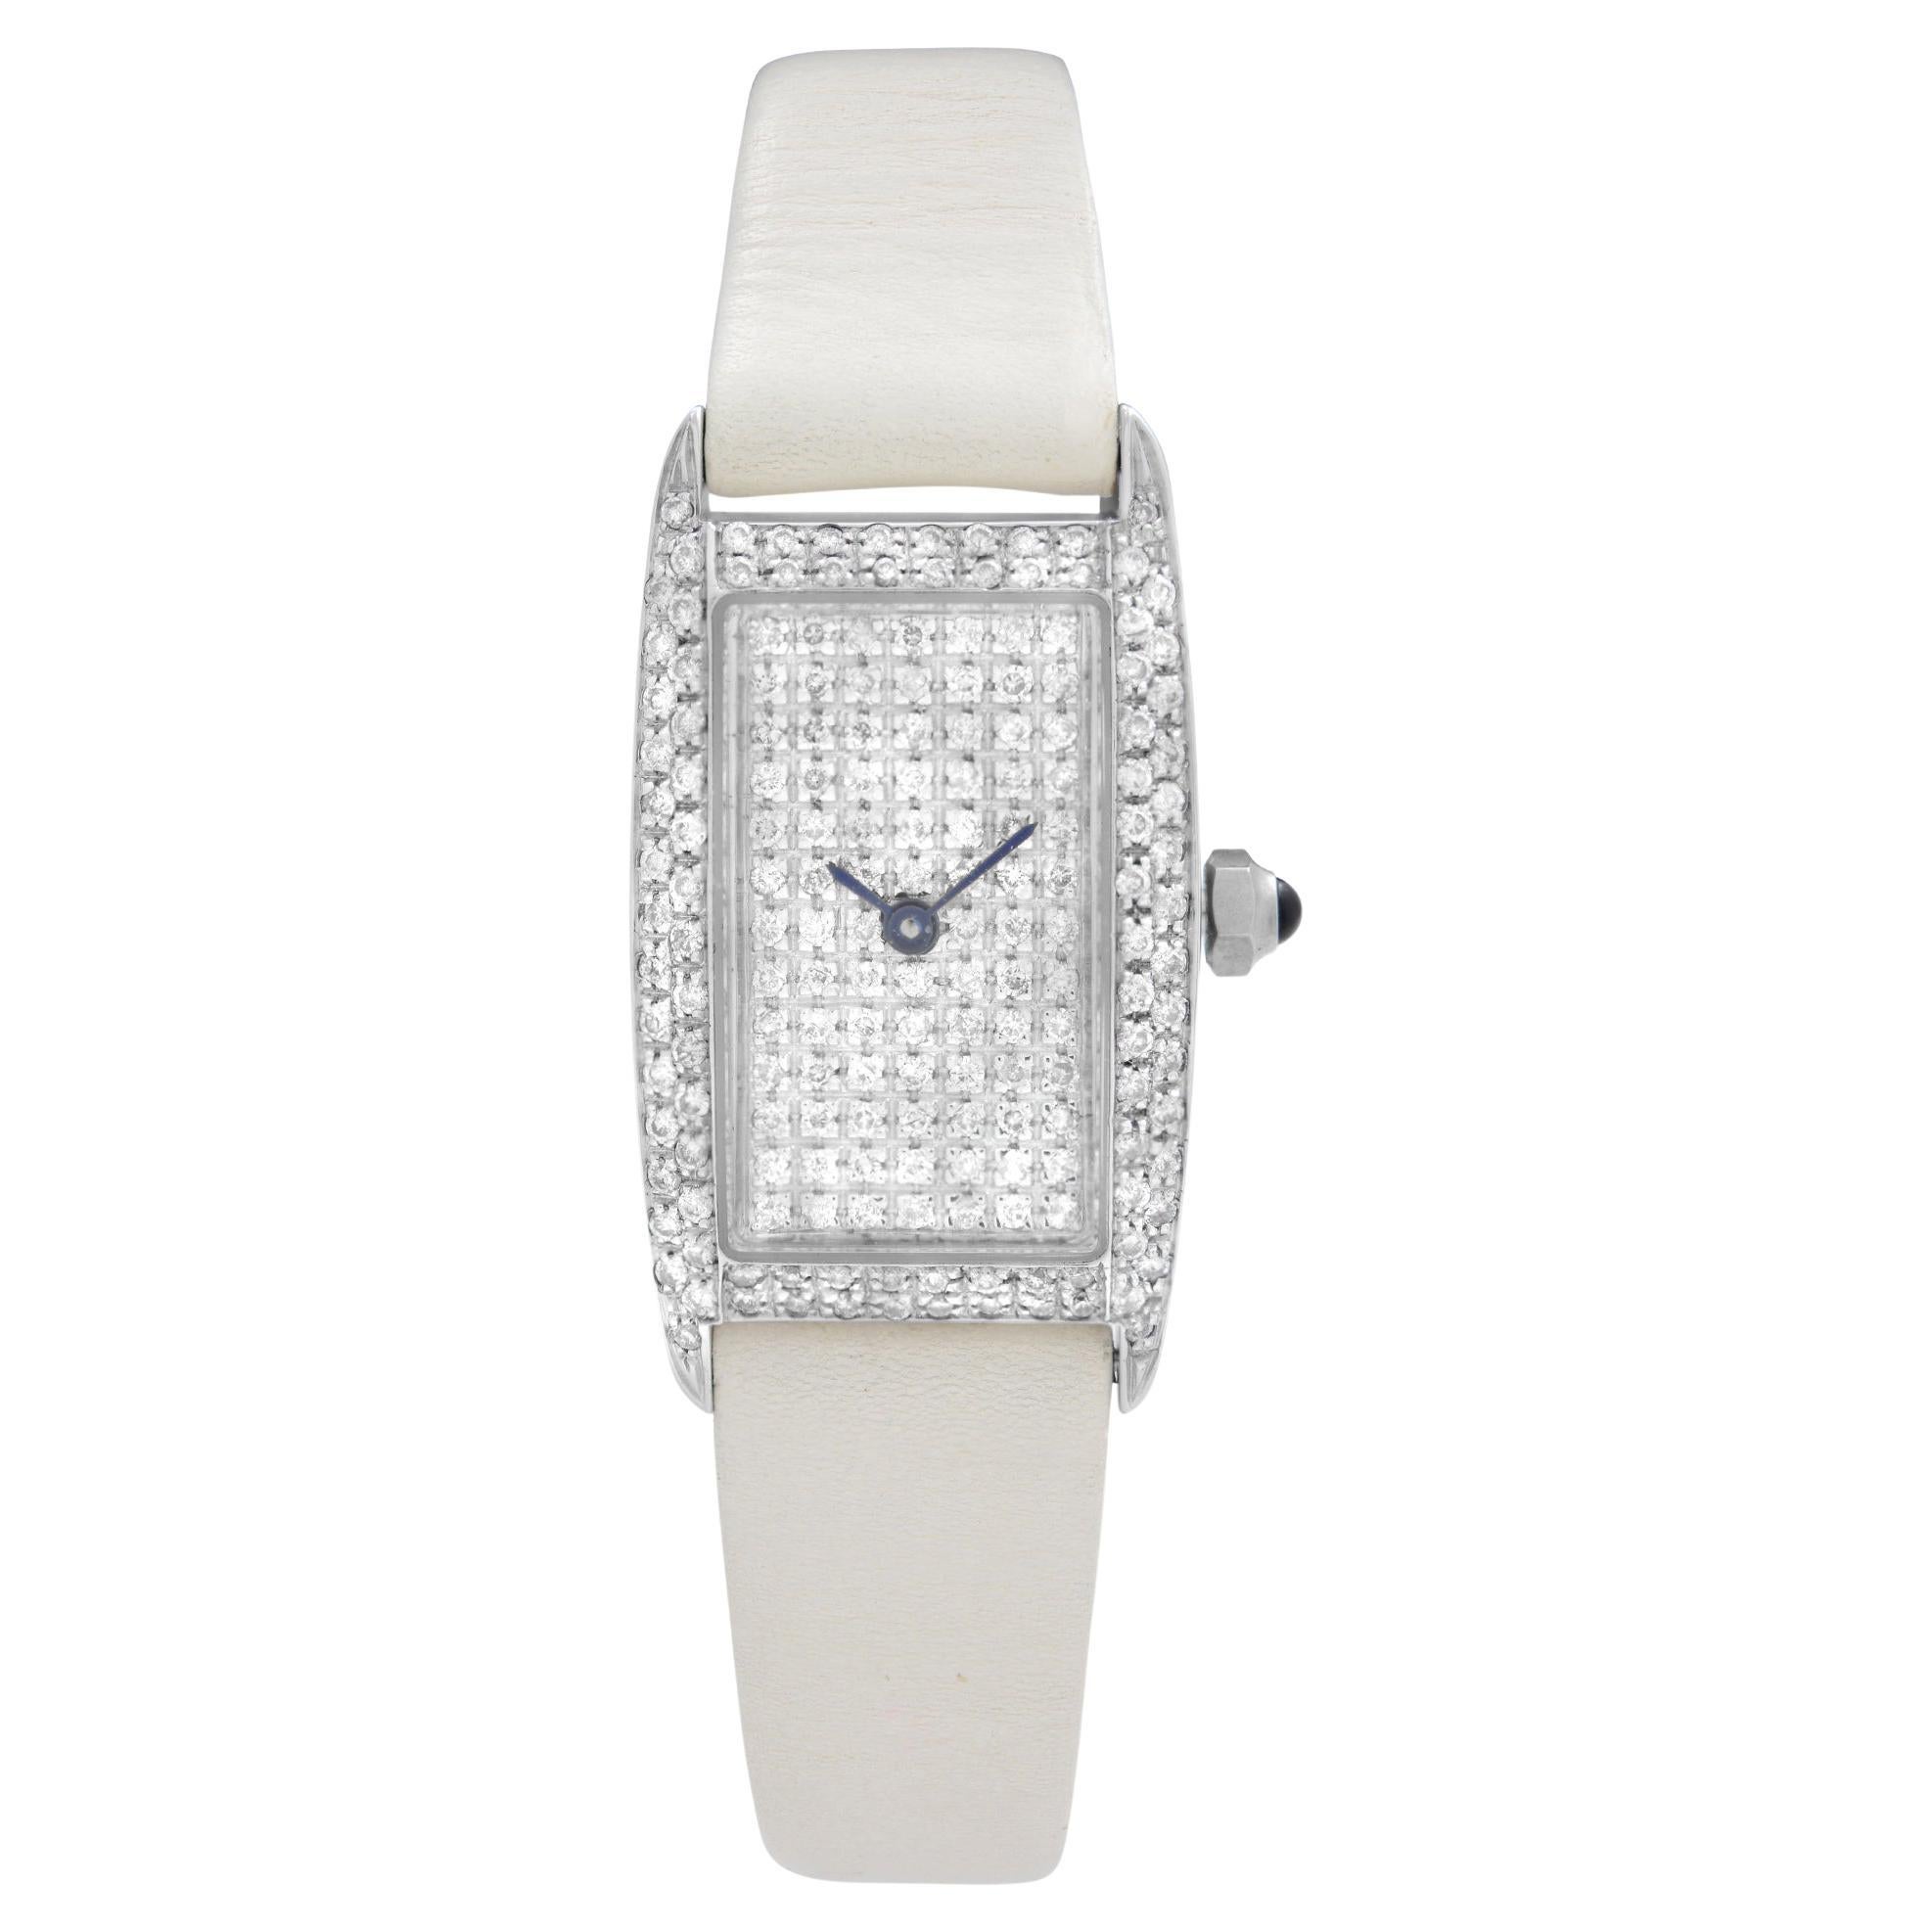 Vicence Milor 14K White Gold Diamond Dial White Leather Strap Ladies Watch For Sale